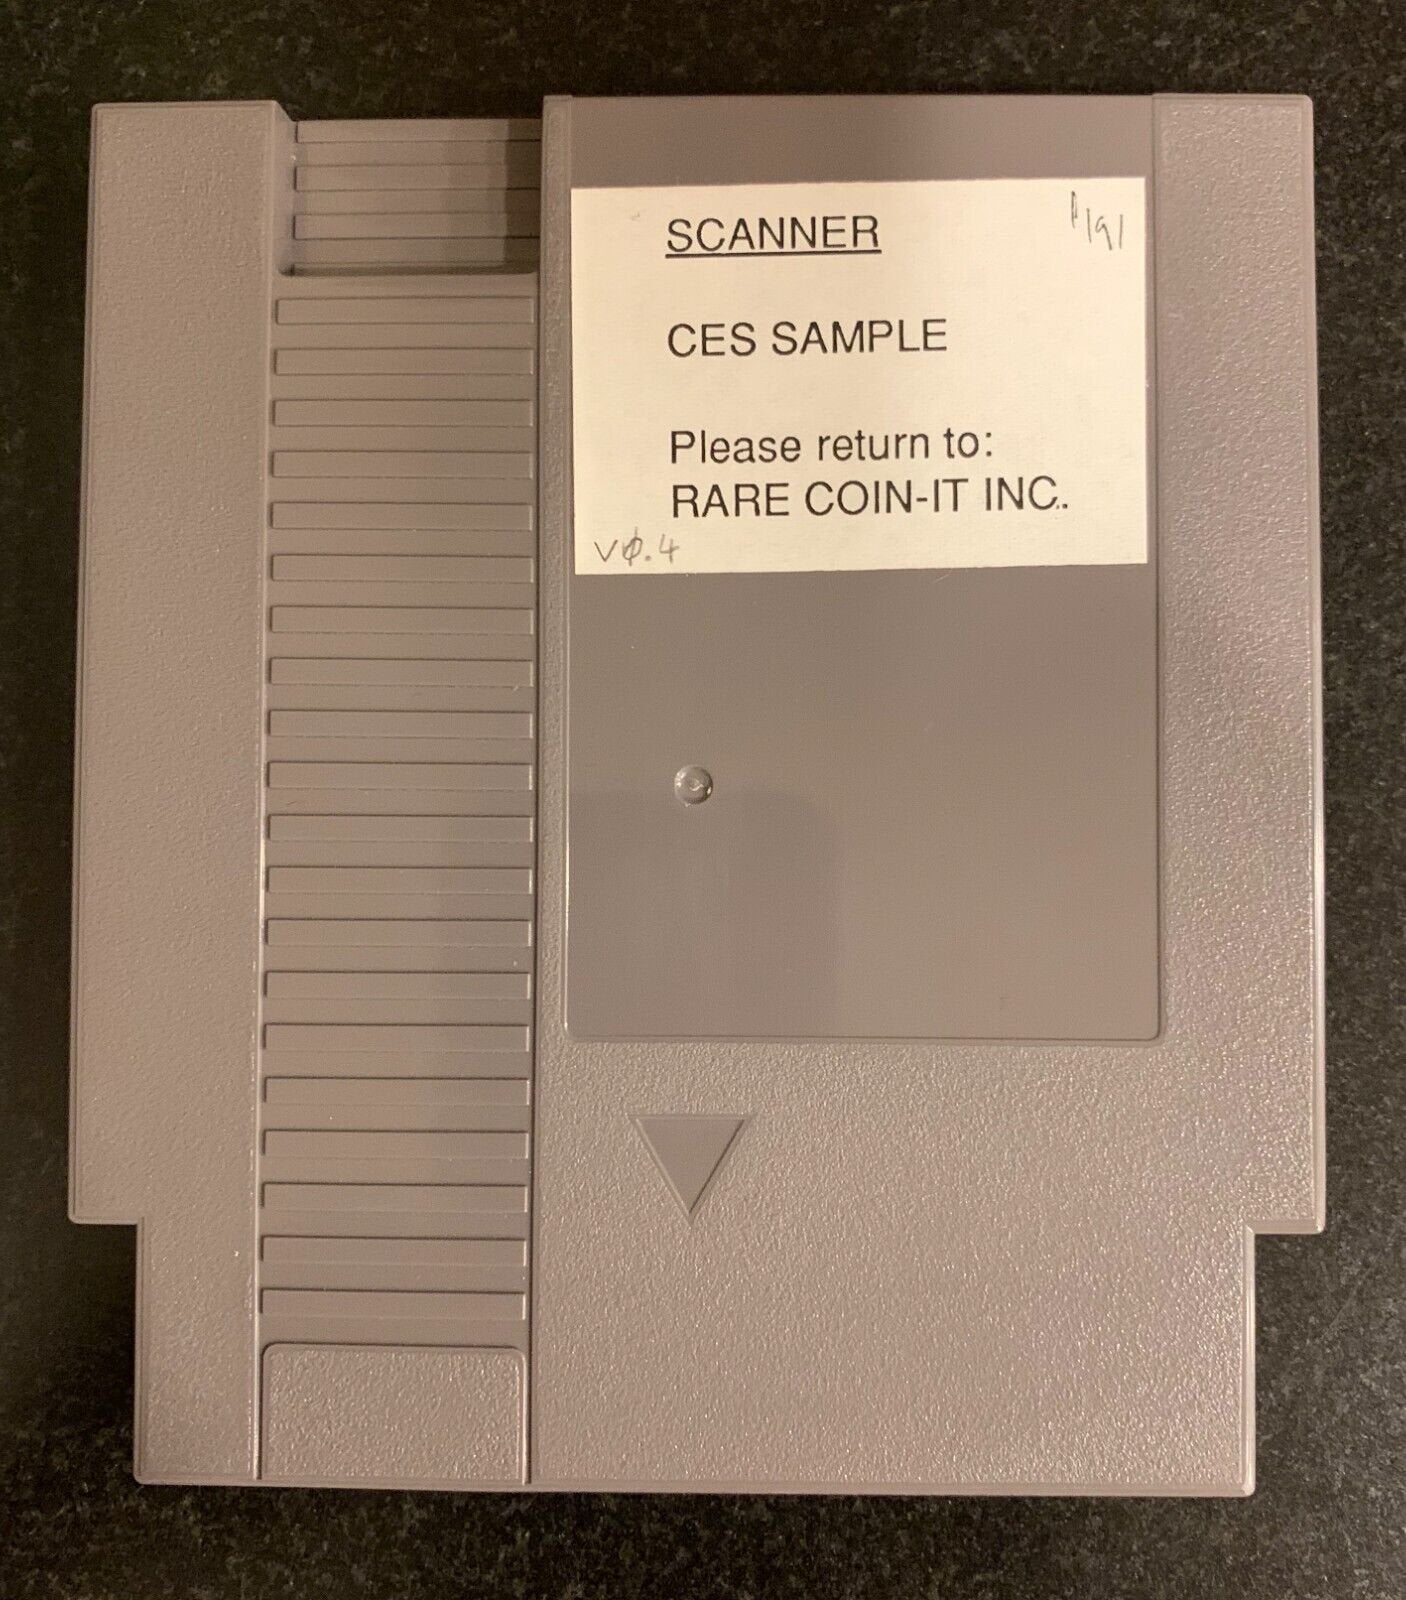 Two Unreleased NES Games Have Turned Up On eBay